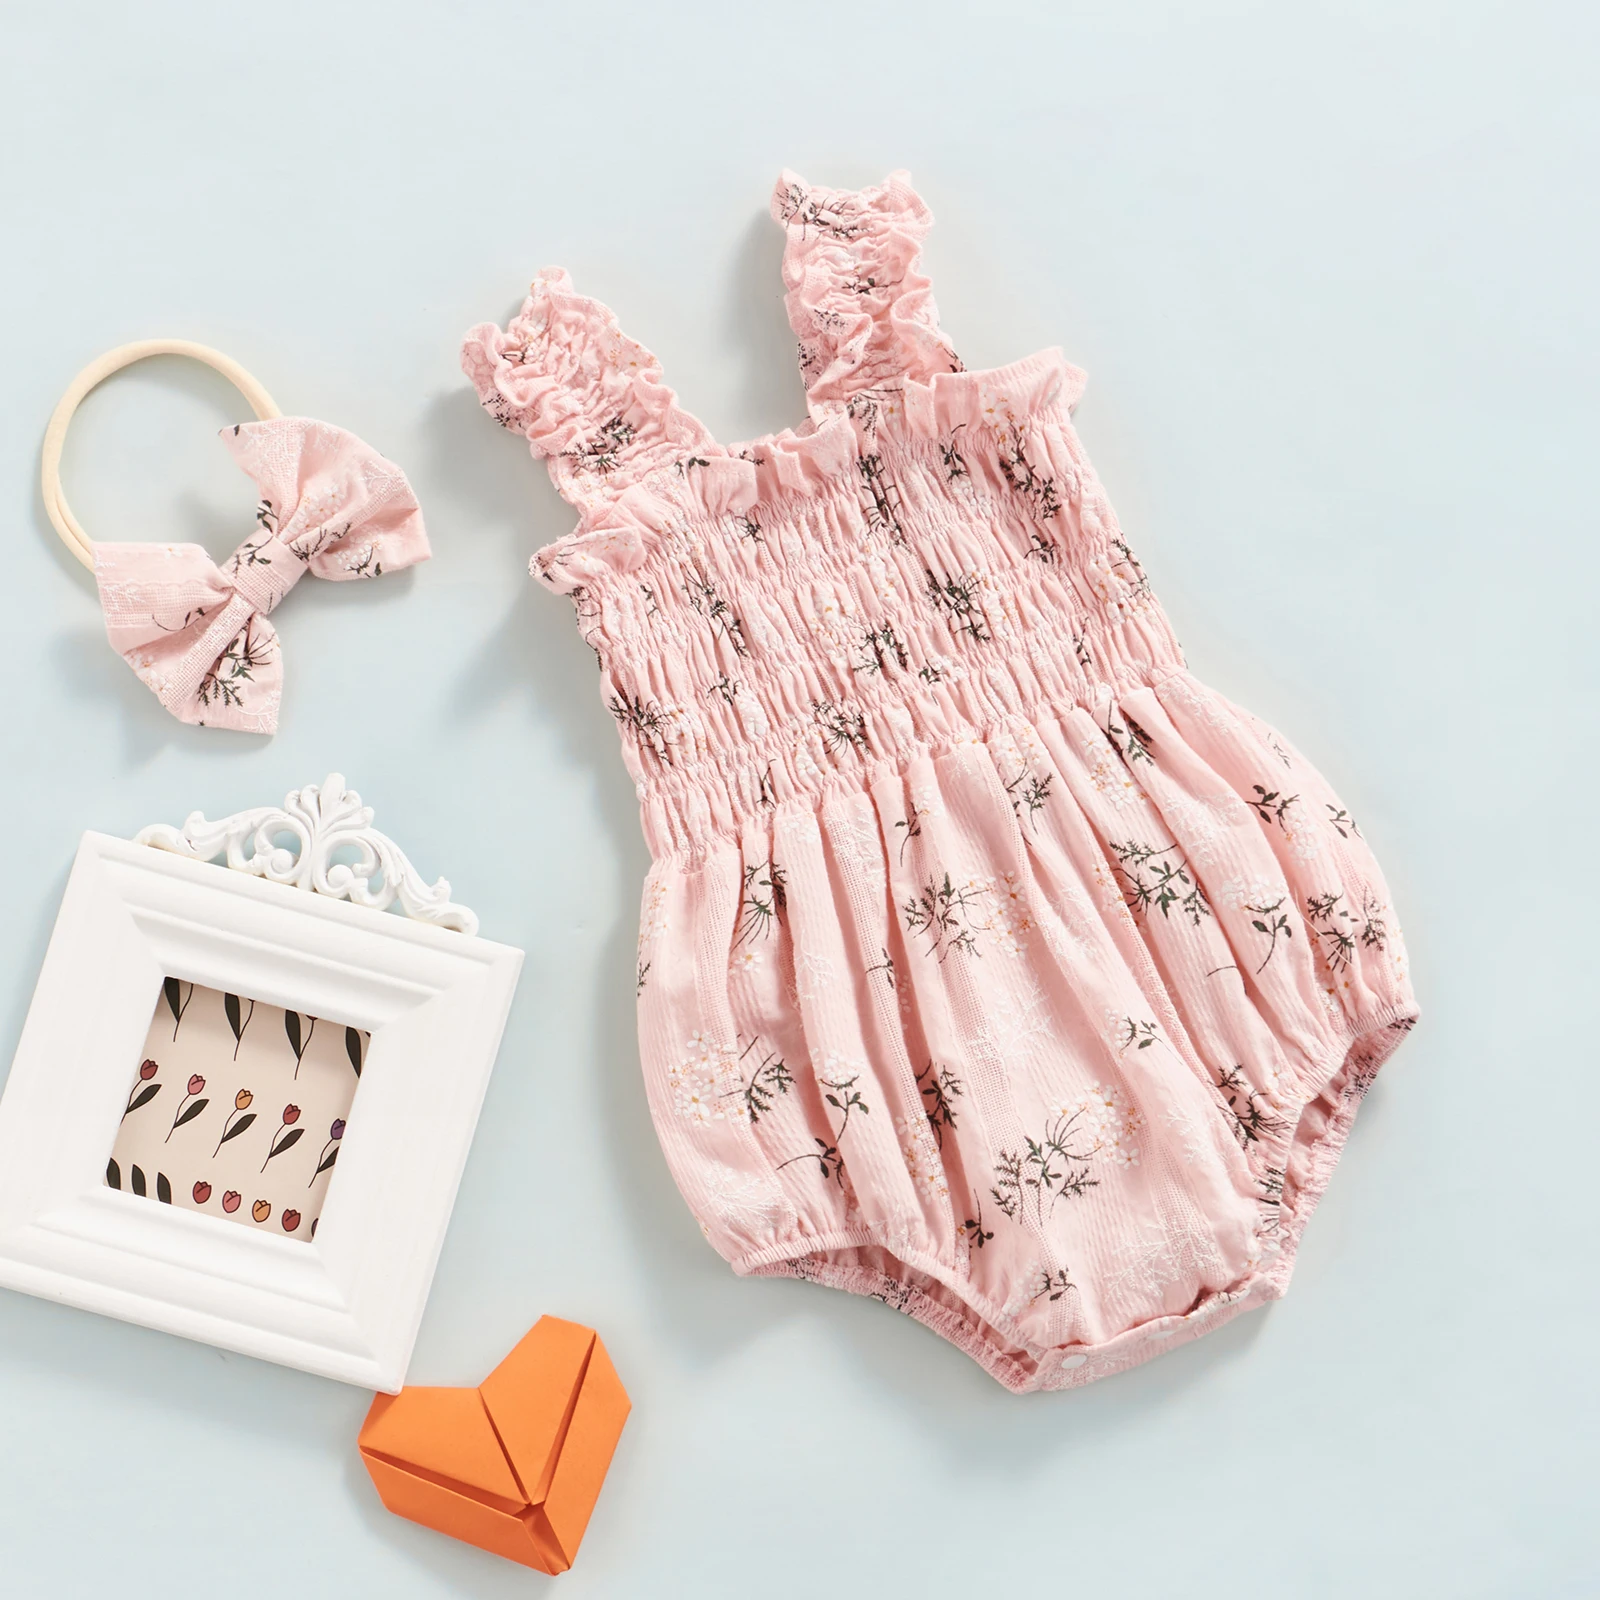 vintage Baby Bodysuits Newborn Baby Girl Ruffles Rompers Floral Sleeveless Jumpsuit Shoulder Straps Playuits + Bow Headband 2Pcs Pleated Casual Clothes Baby Bodysuits made from viscose 